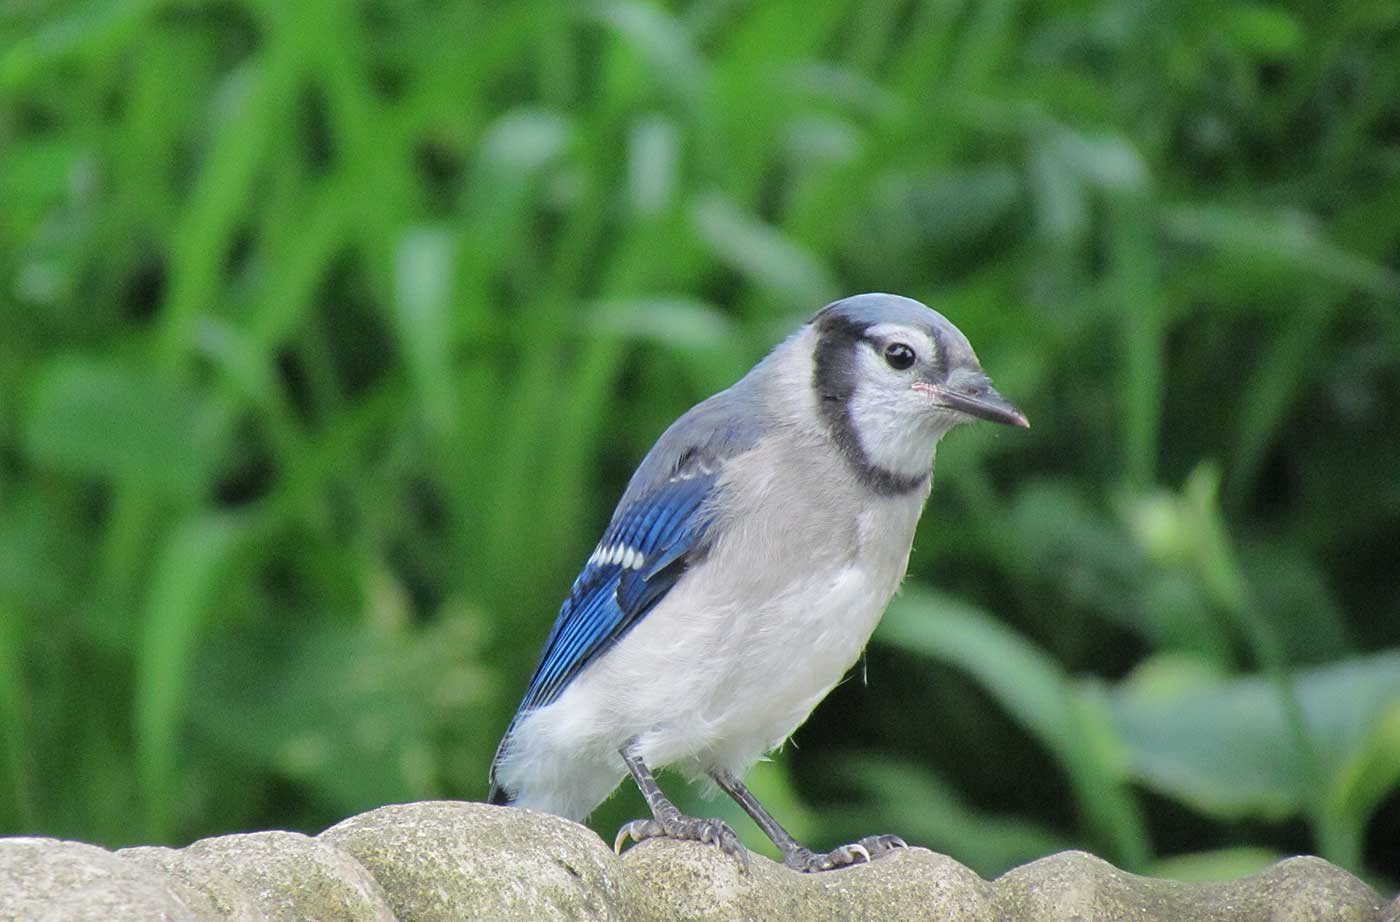 Blue Jay with grass behind it